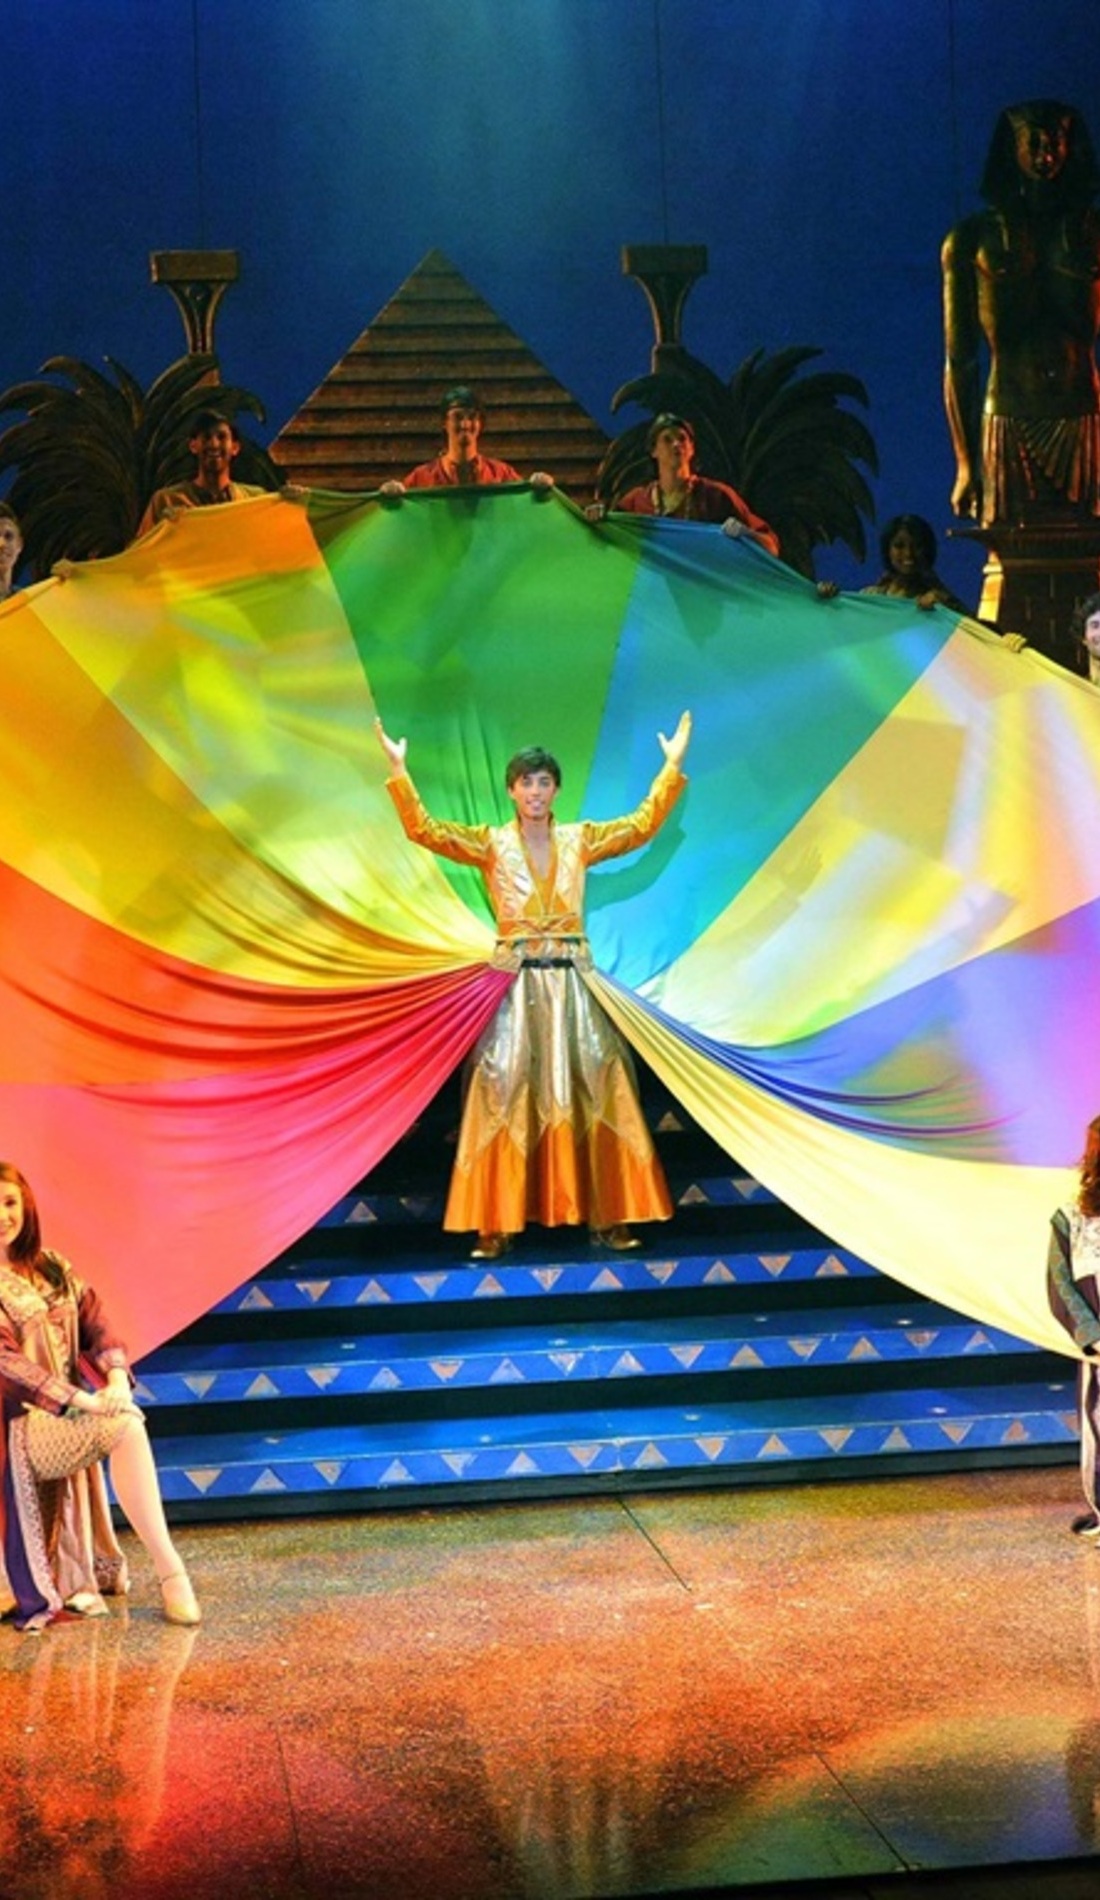 A Joseph And The Amazing Technicolor Dreamcoat live event